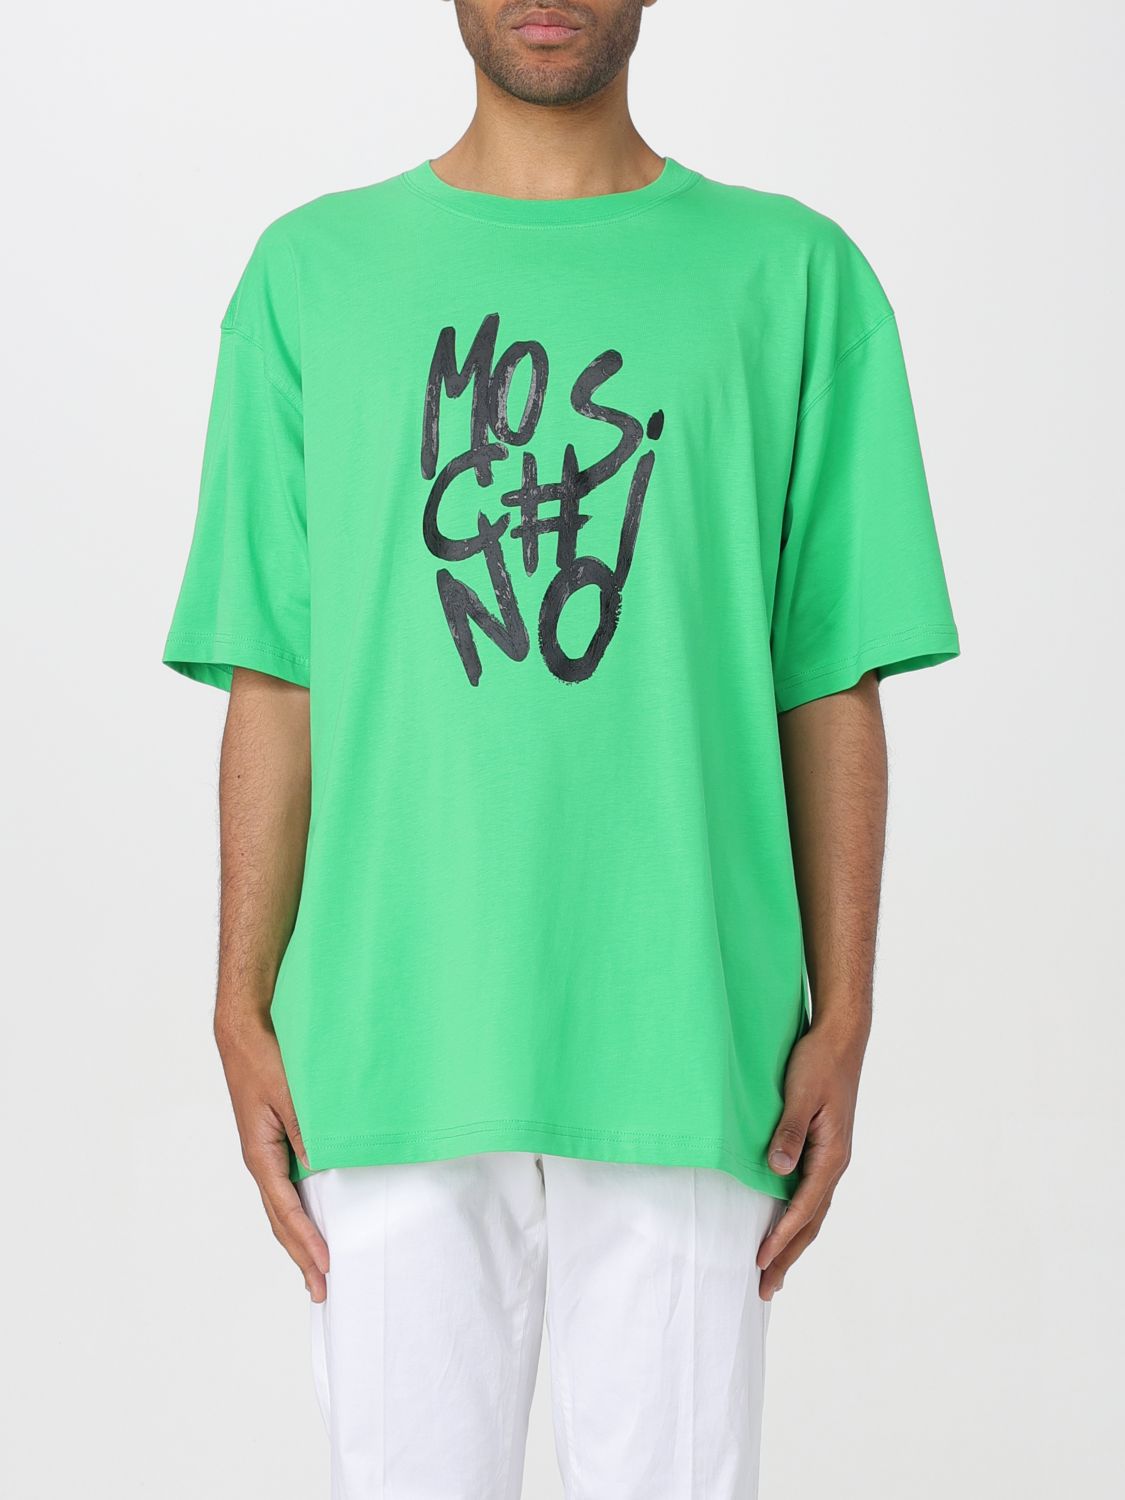 Moschino Couture T-Shirt MOSCHINO COUTURE Men color Green